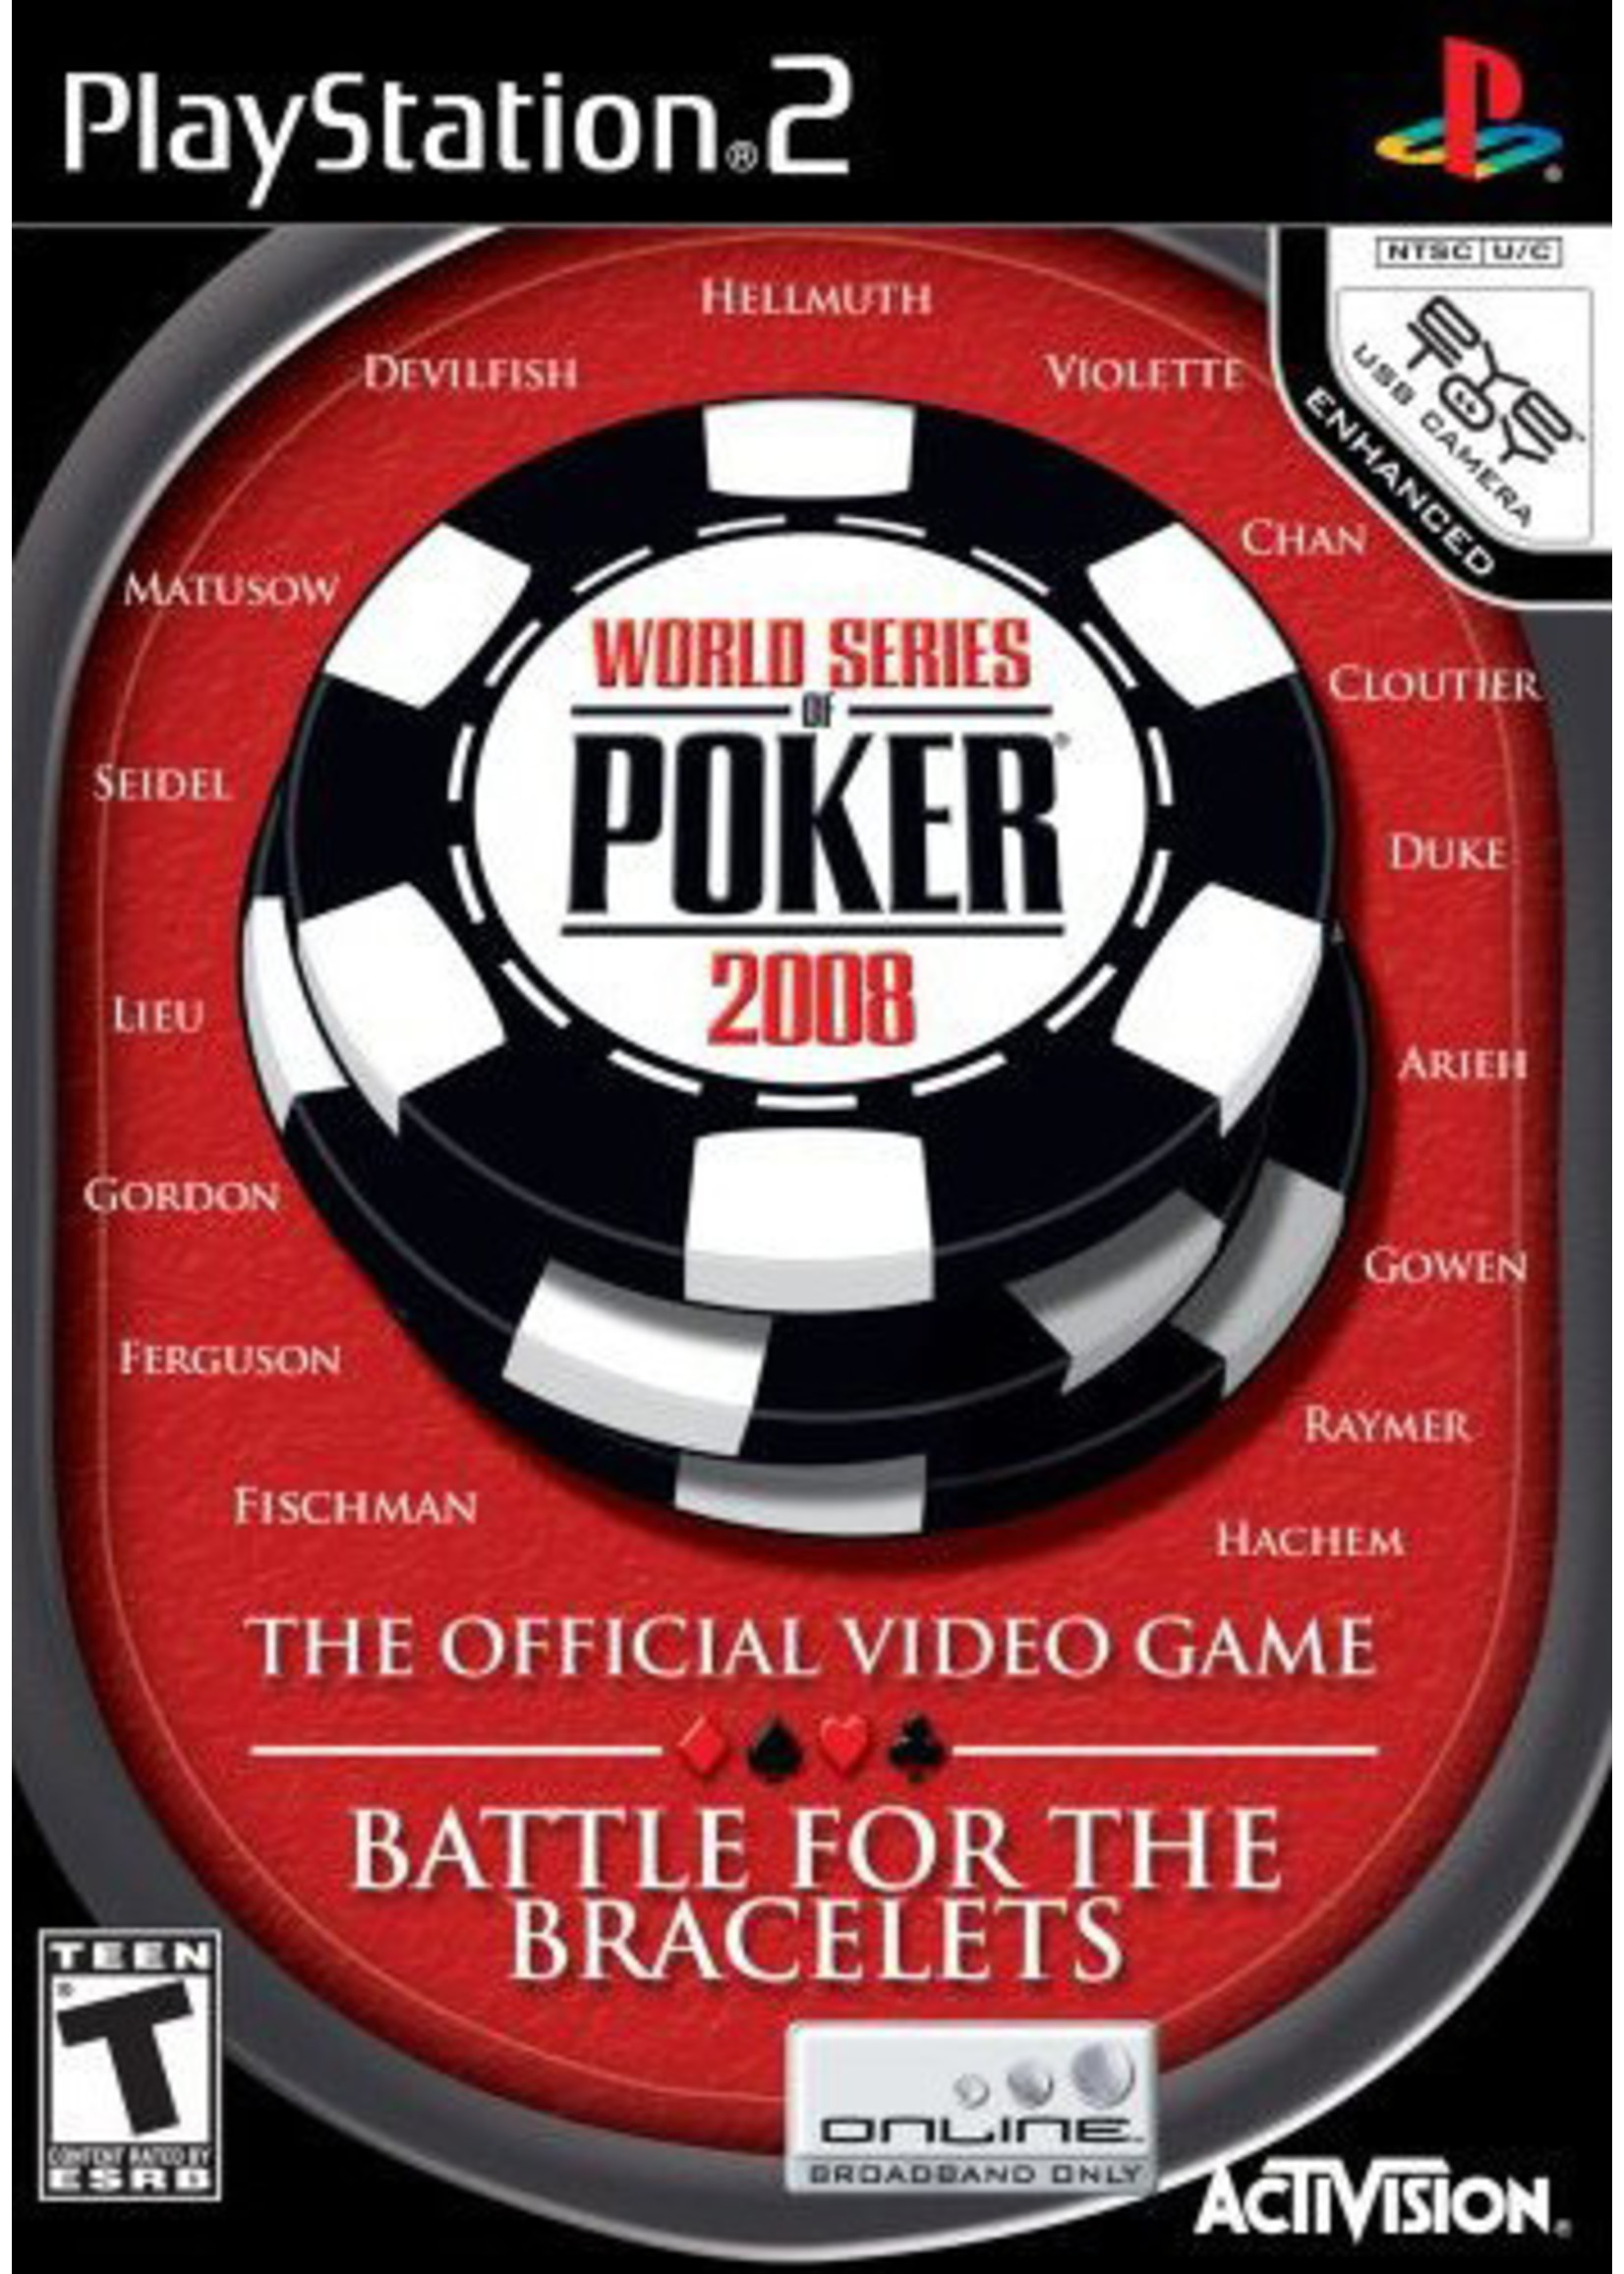 Sony Playstation 2 (PS2) World Series Of Poker 2008